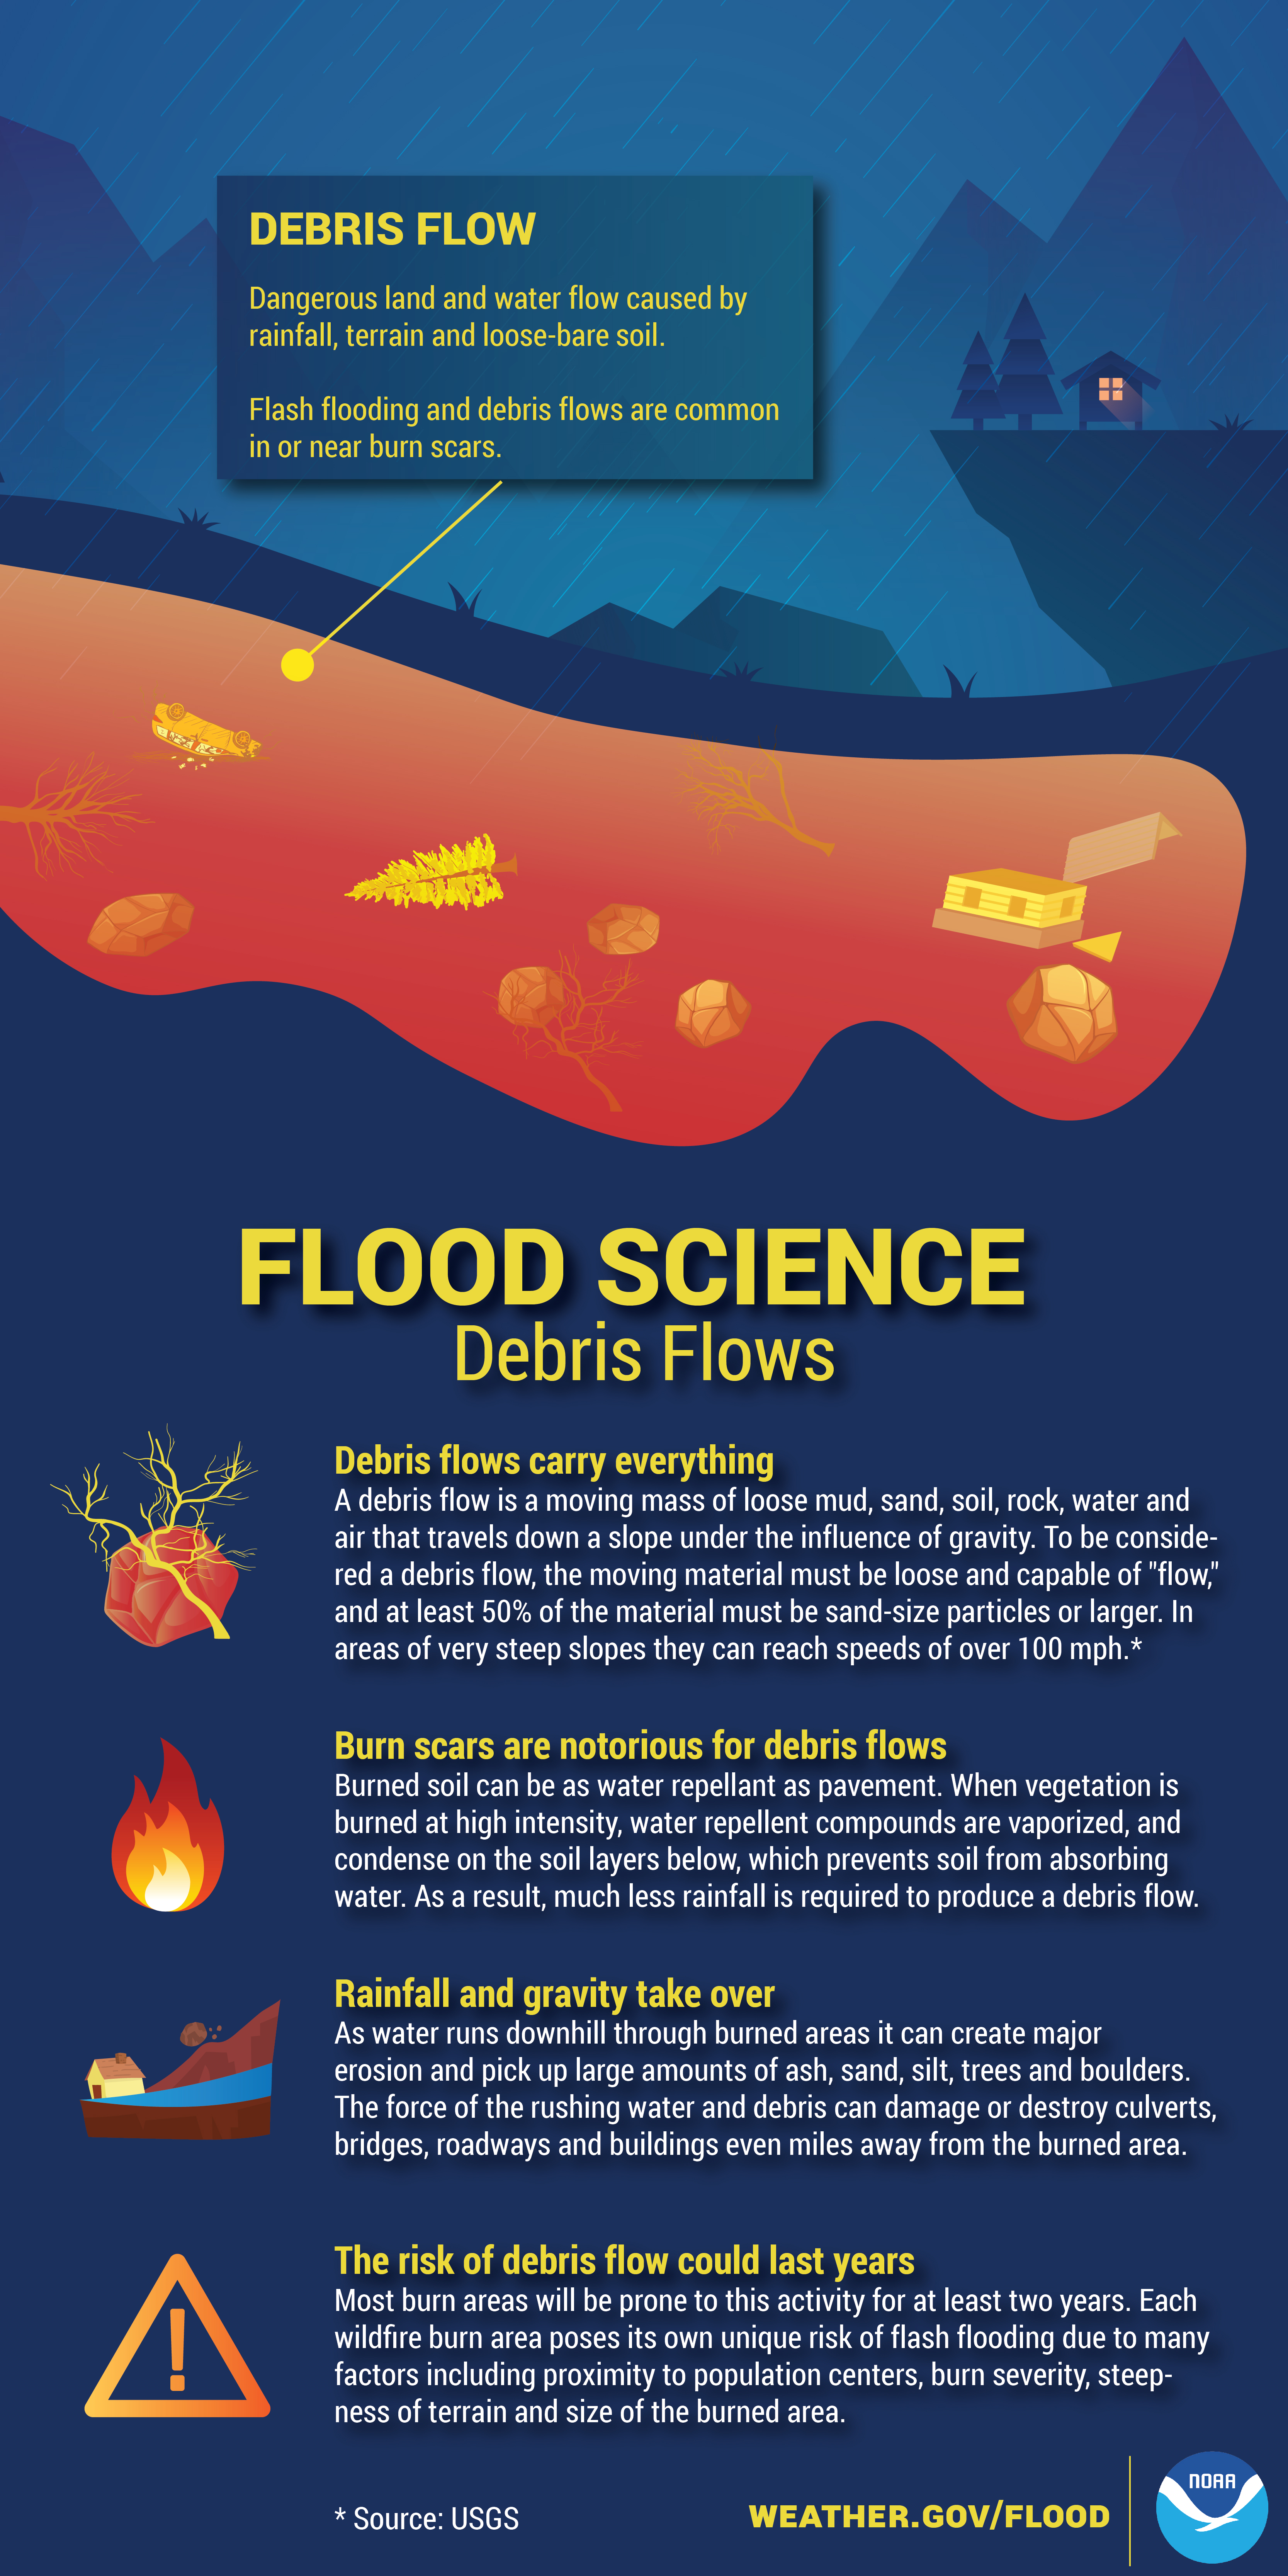 Flood Science - Debris Flows 
	Debris Flows: Dangerous land and water flow caused by rainfall, terrain and loose-bare soil. Flash flooding and debris flows are common in or near burn scars.  
	Debris flows carry everything: A debris flow is a moving mass of loose mud, sand, soil, rock, water and air that travels down a slope under the influence of gravity. To be considered a debris flow, the moving material must be loose and capable of 'flow', and at least 50% of the material must be sand-size particles or larger. In areas of very steep slopes they can reach speeds of over 100 mph.  
	Burn scars are notorious for debris flows: Burned soil can be as water repellant as pavement. When vegetation is burned at high intensity, water repellent compounds are vaporized, and condense on the soil layers below, which prevents soil from absorbing water. As a result, much less rainfall is required to produce a flash flood.  
	Rainfall and gravity take over: As water runs downhill through burned areas it can create major erosion and pick up large amounts of ash, sand, silt, trees and boulders. The force of the rushing water and debris can damage or destroy culverts, bridges, roadways, and buildings even miles away from the burned area. 
	The risk of debris flow could last years: Most burn areas will be prone to this activity for at least two years. Each wildfire burn area poses its own unique risk of flash flooding due to many factors including proximity to population centers, burn severity, steepness of terrain, and size of the burned area. 
	www.weather.gov/flood